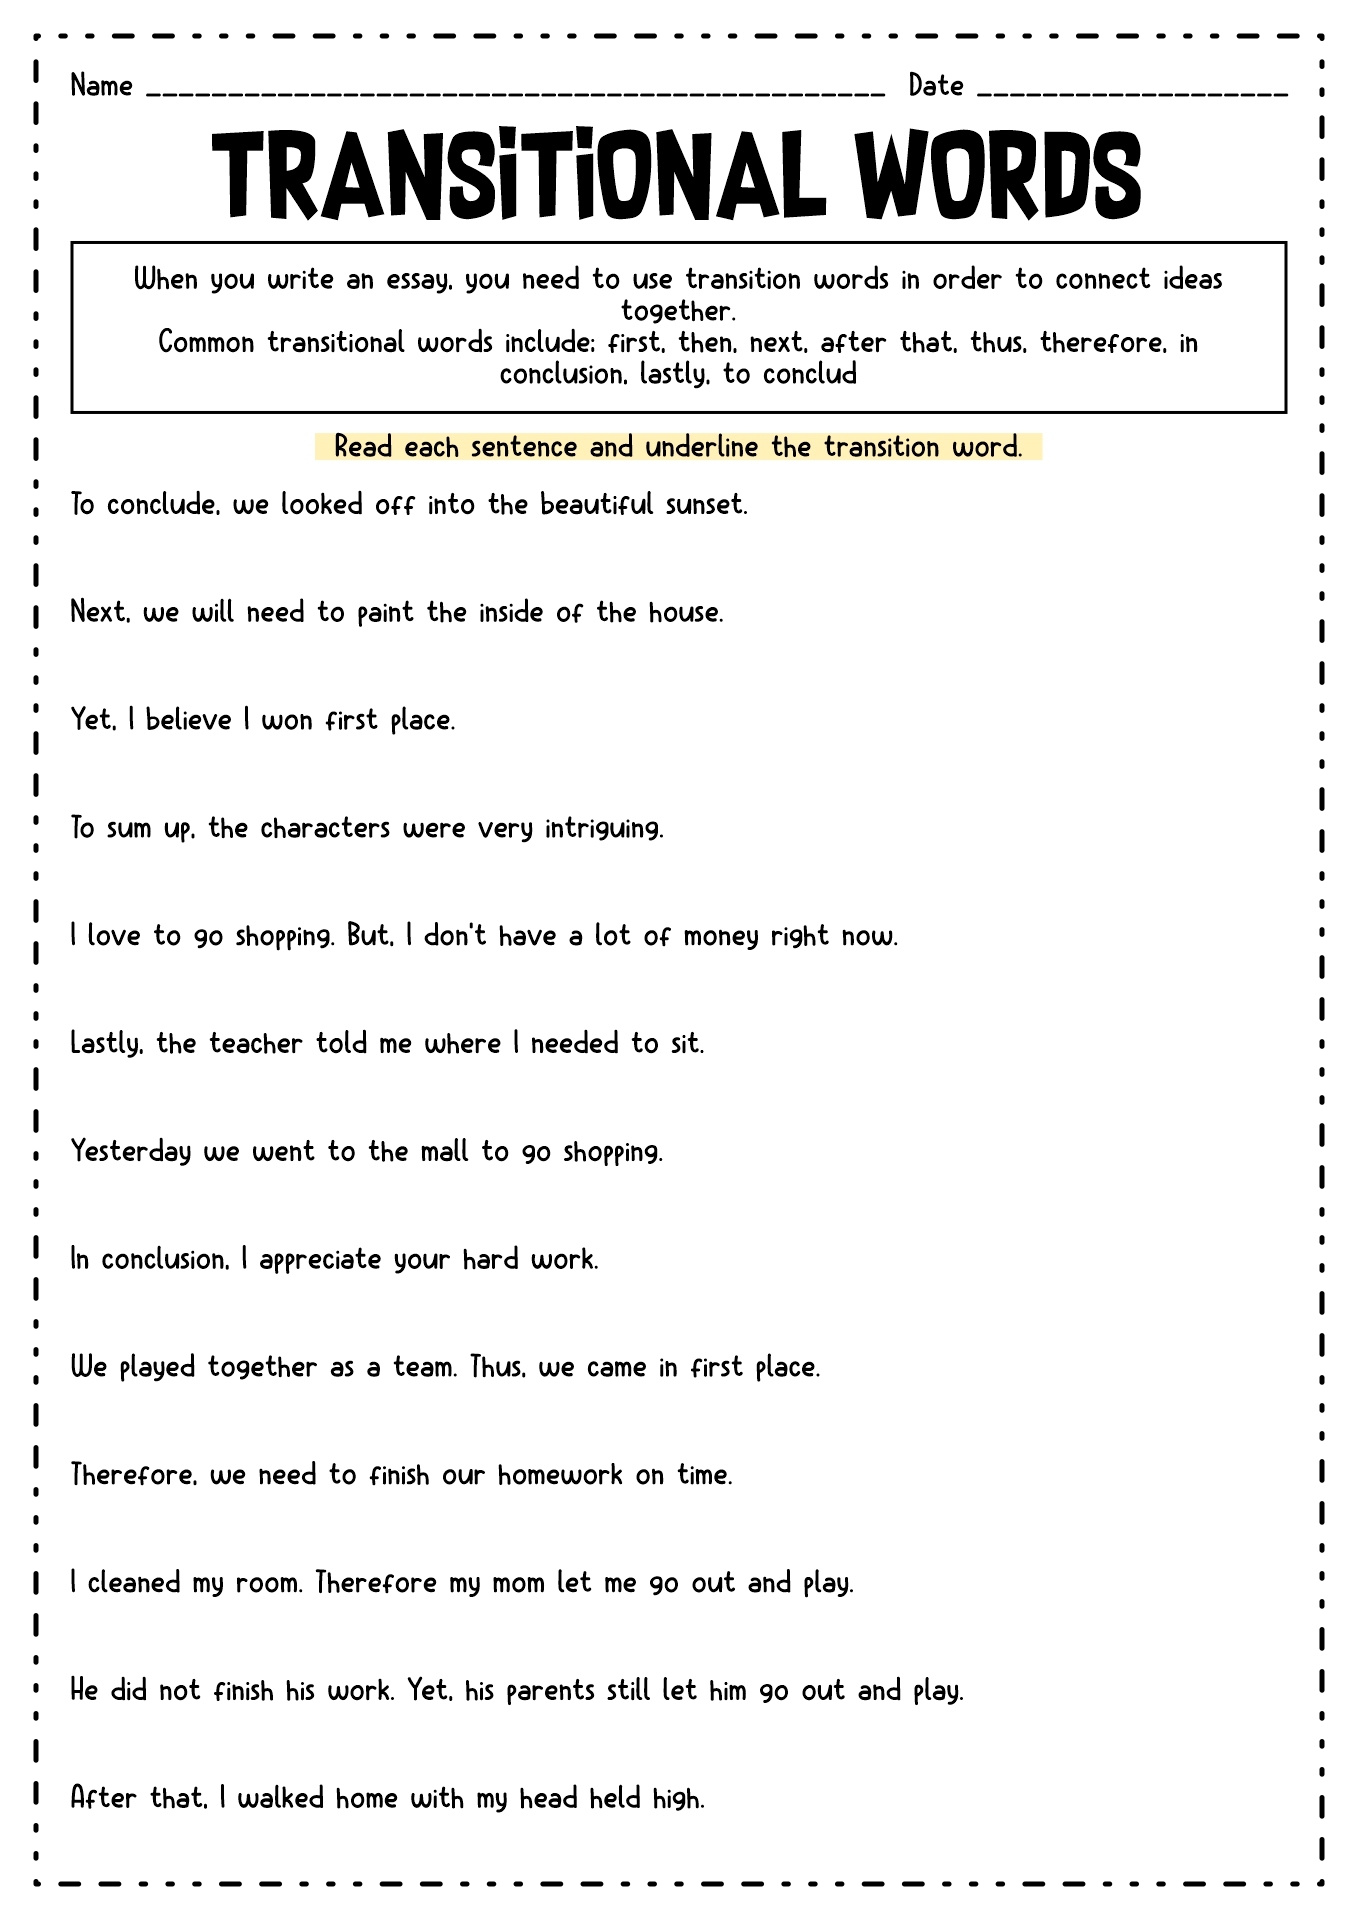 17-worksheets-transition-words-and-phrases-worksheeto